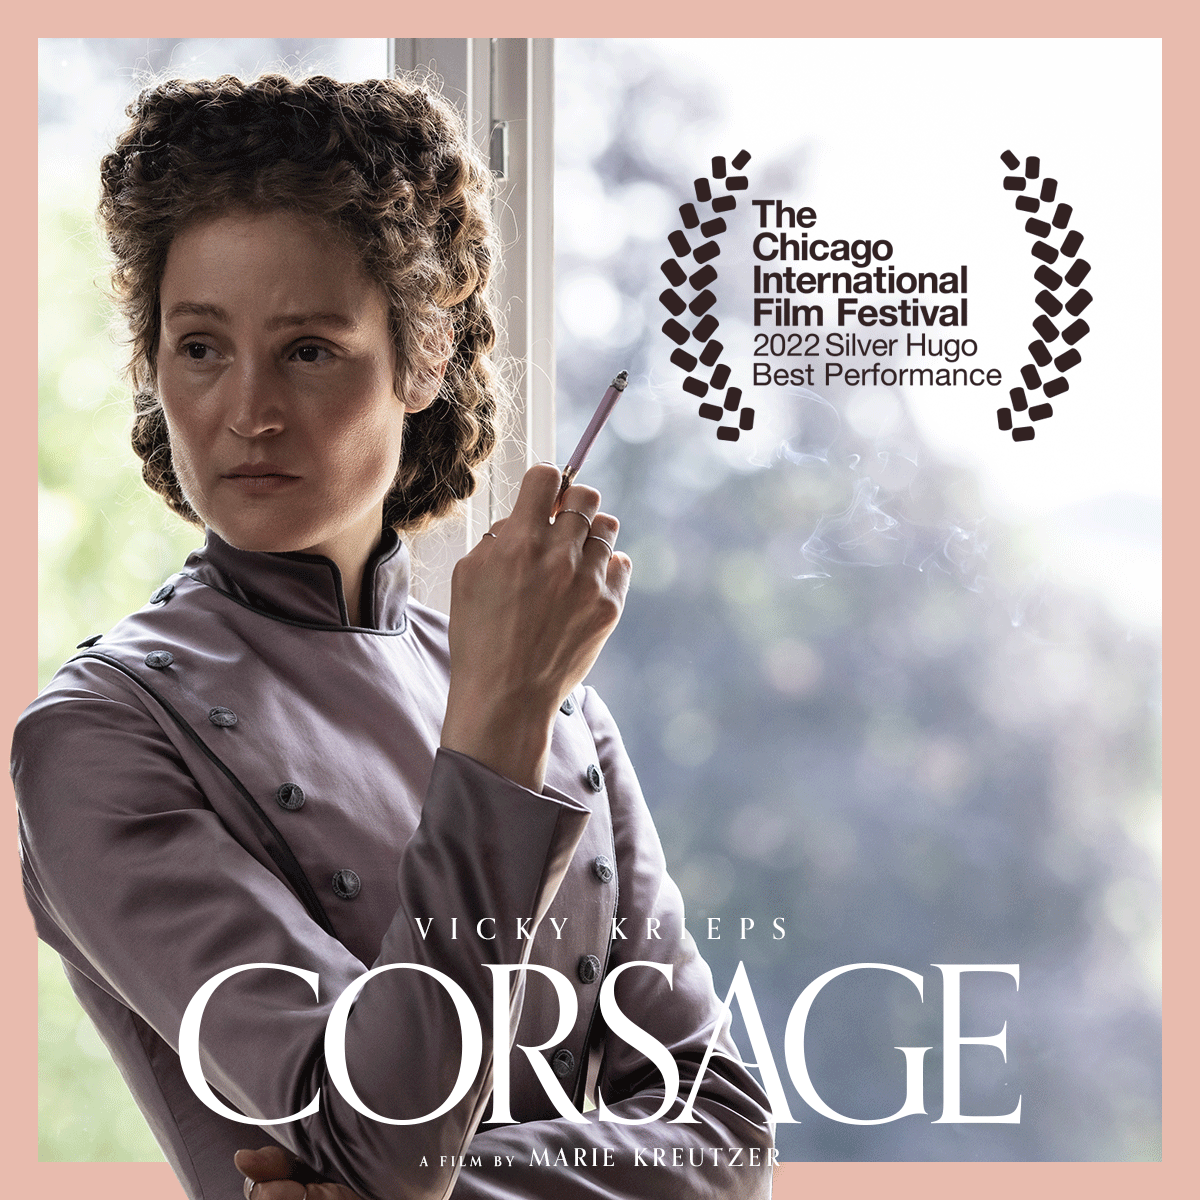 #Corsage star #VickyKrieps wins the Best Performance award at #ChiFilmFest !